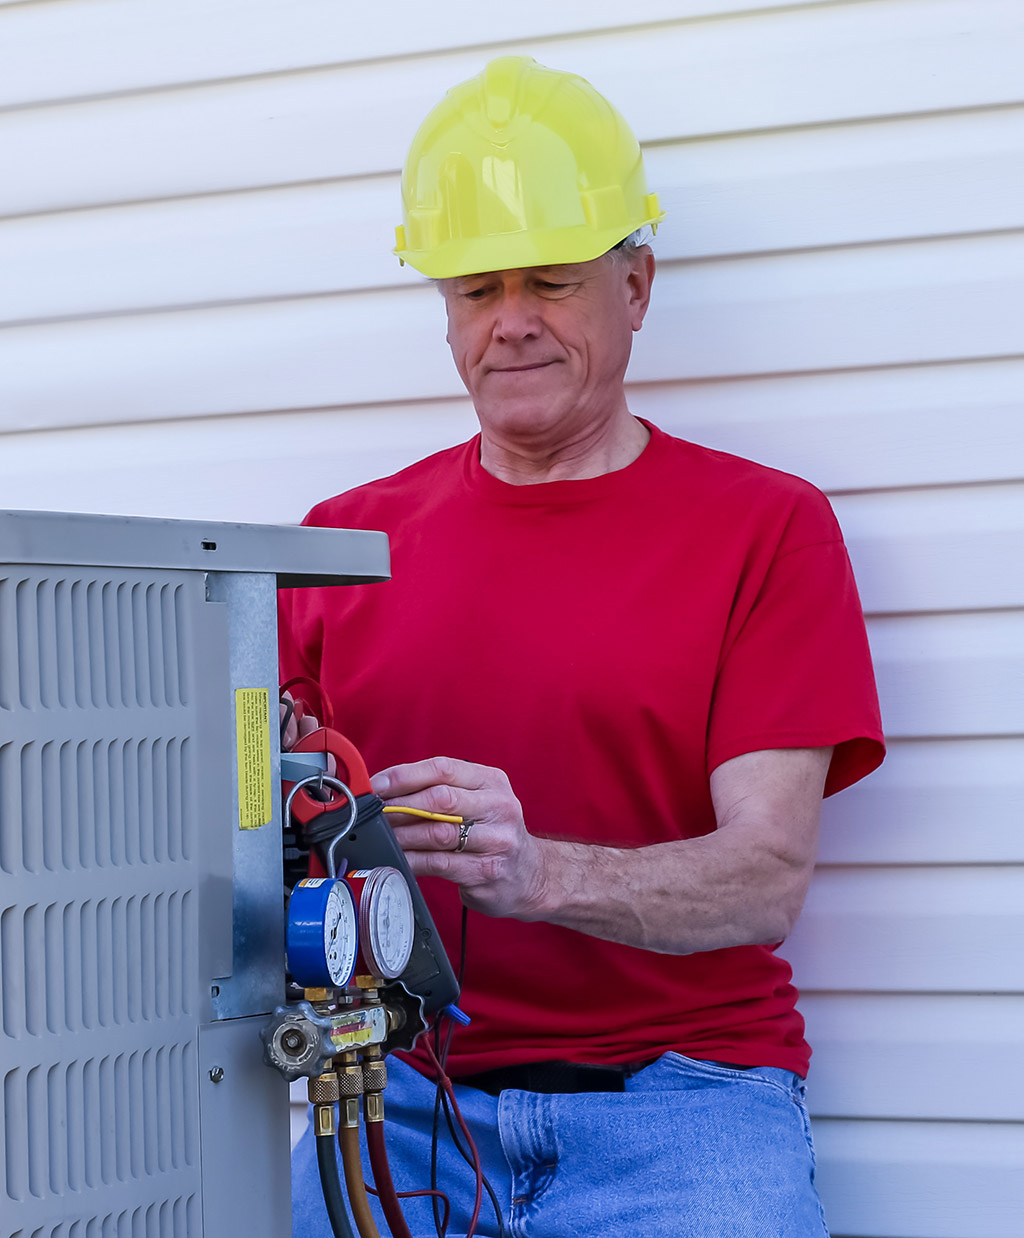 Common HVAC Problems and Preventive HVAC Maintenance | Heating and Air Condition Service in Dallas, TX